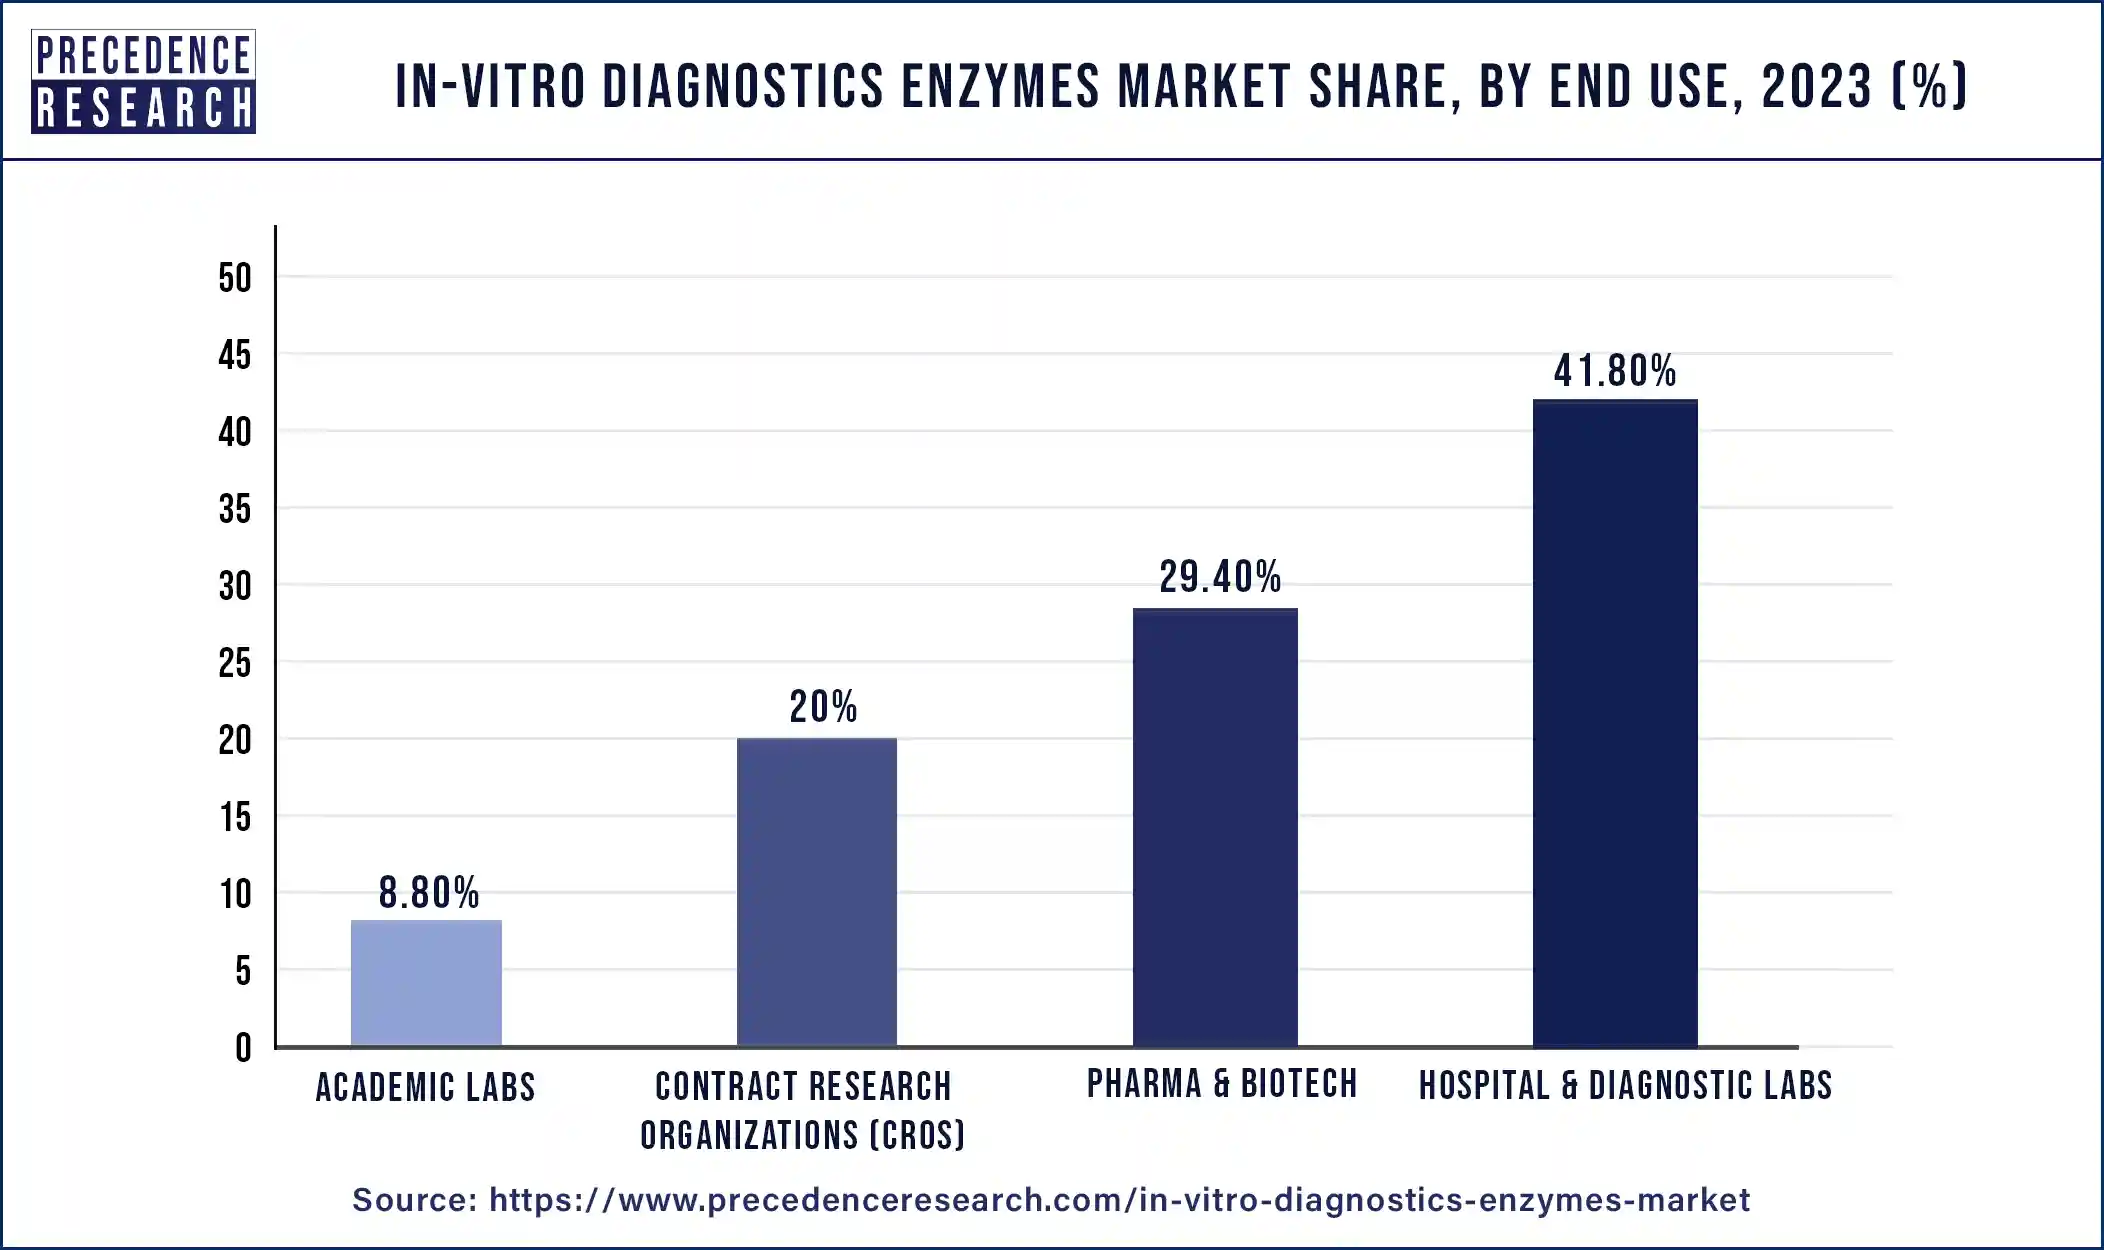 In-vitro Diagnostics Enzymes Market Share, By End Use, 2023 (%)